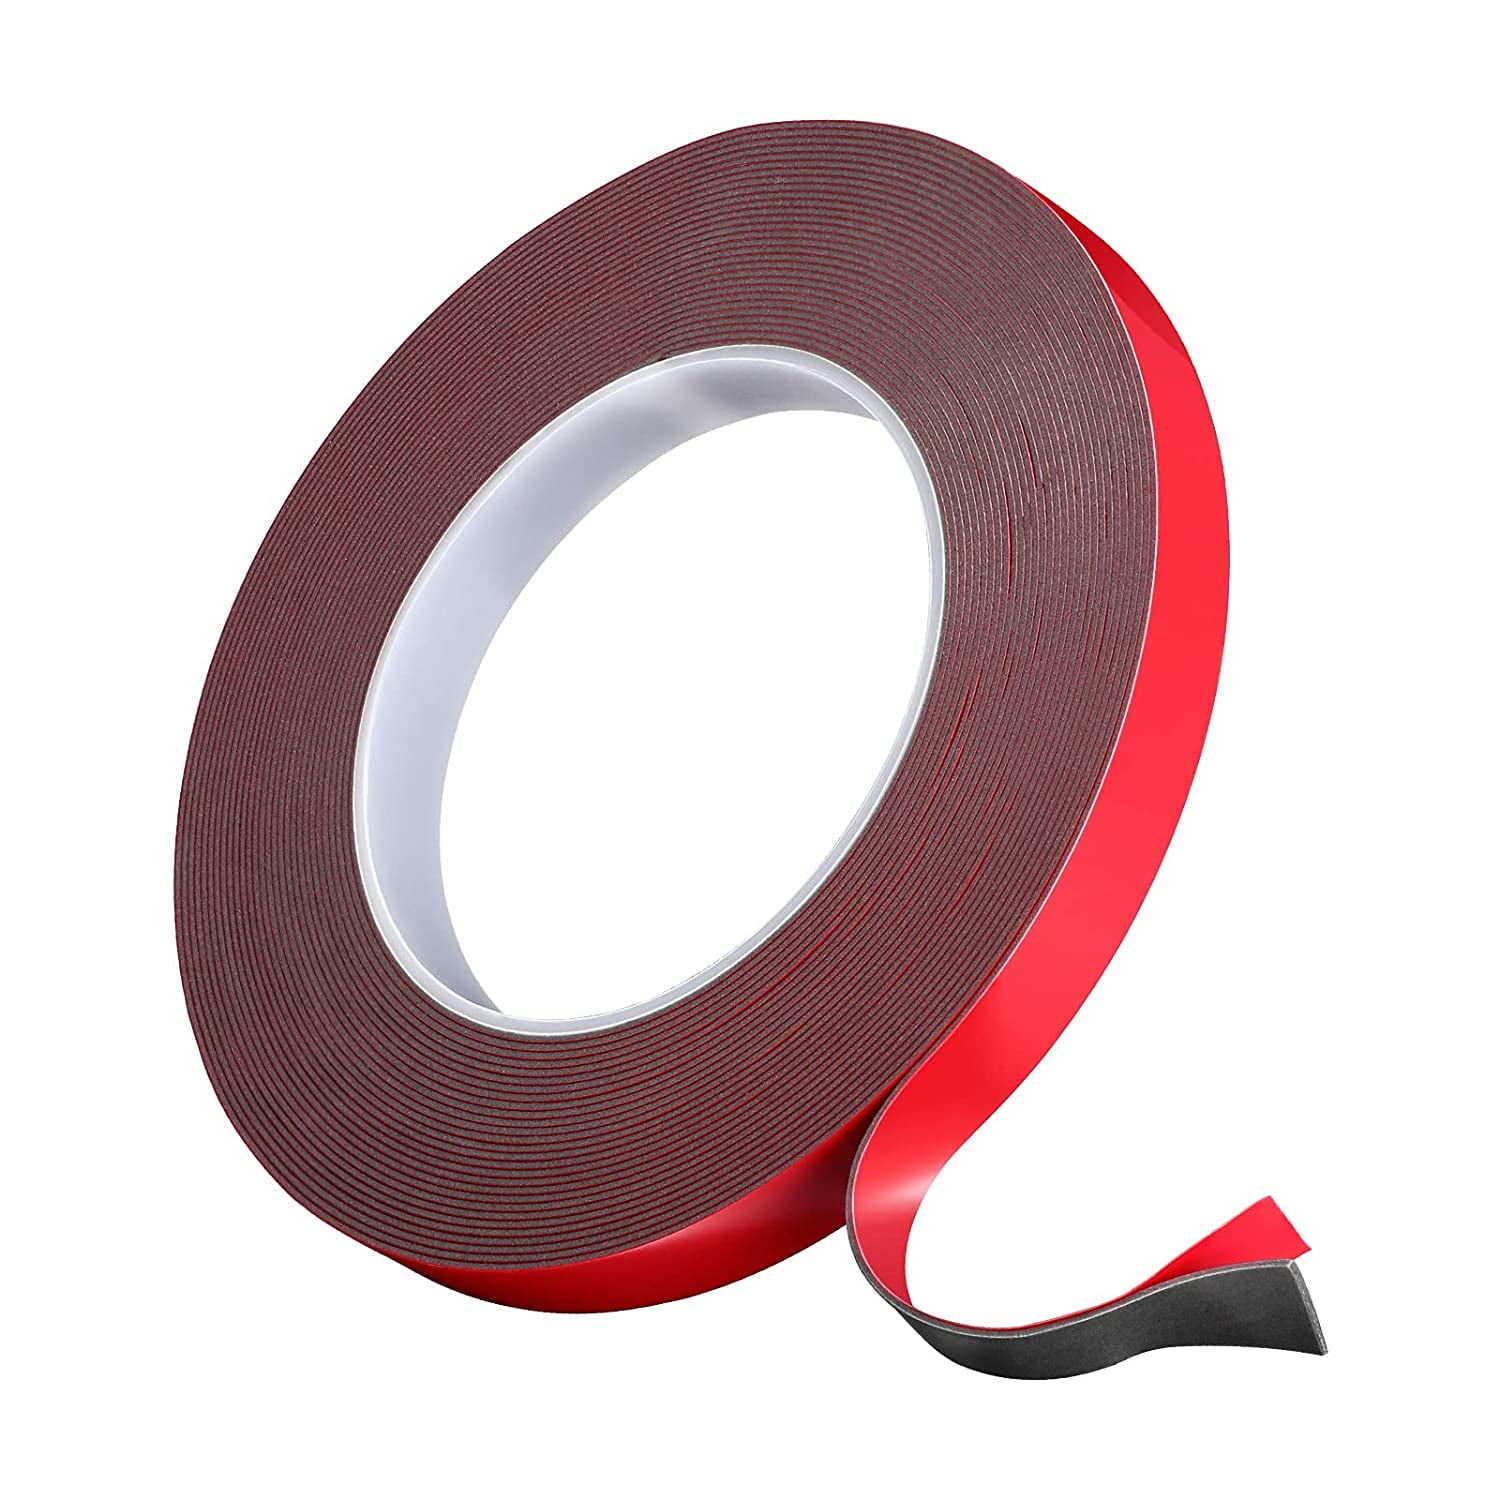 Hitlights Double Sided Heavy Duty Waterproof Mounting Foam Tape 164ft Length 094in Width Strong Adhesive Tape for Car Wall LED Strip Light Home/Office